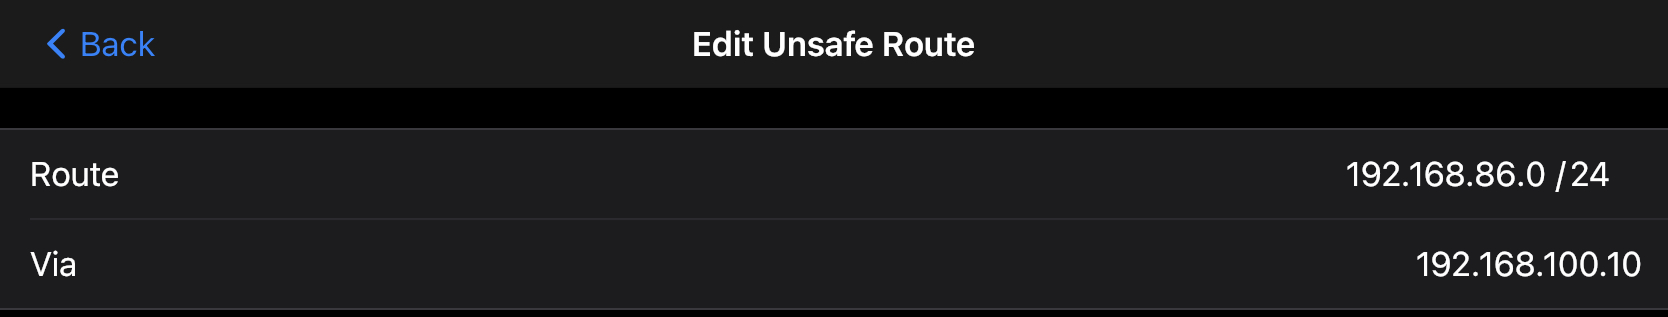 Screenshot of editing an Unsafe Route in Mobile Nebula